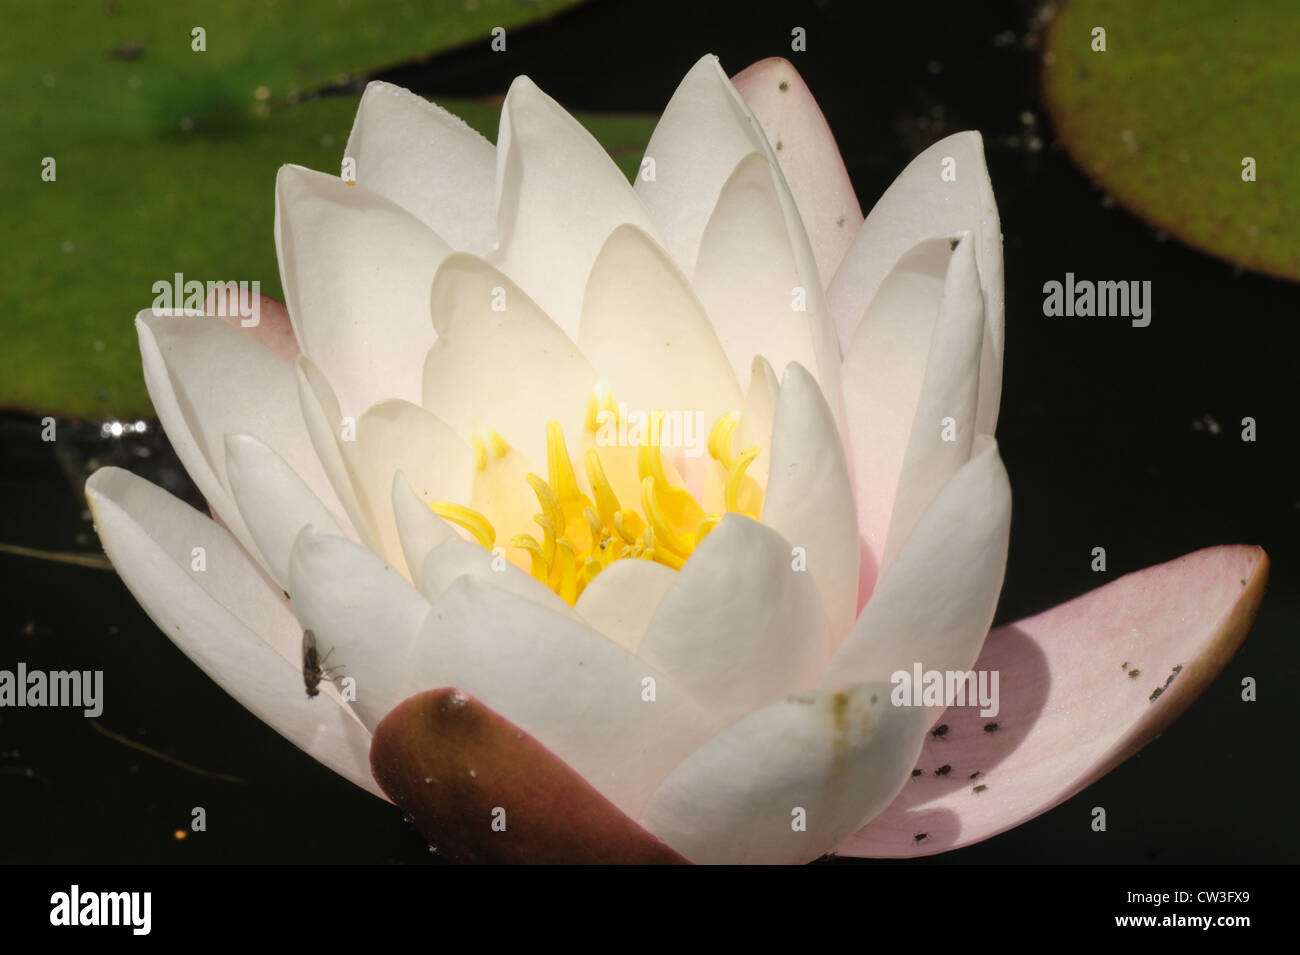 Water lily aphid (Rhopalosiphum nympheae) on lily flower Stock Photo